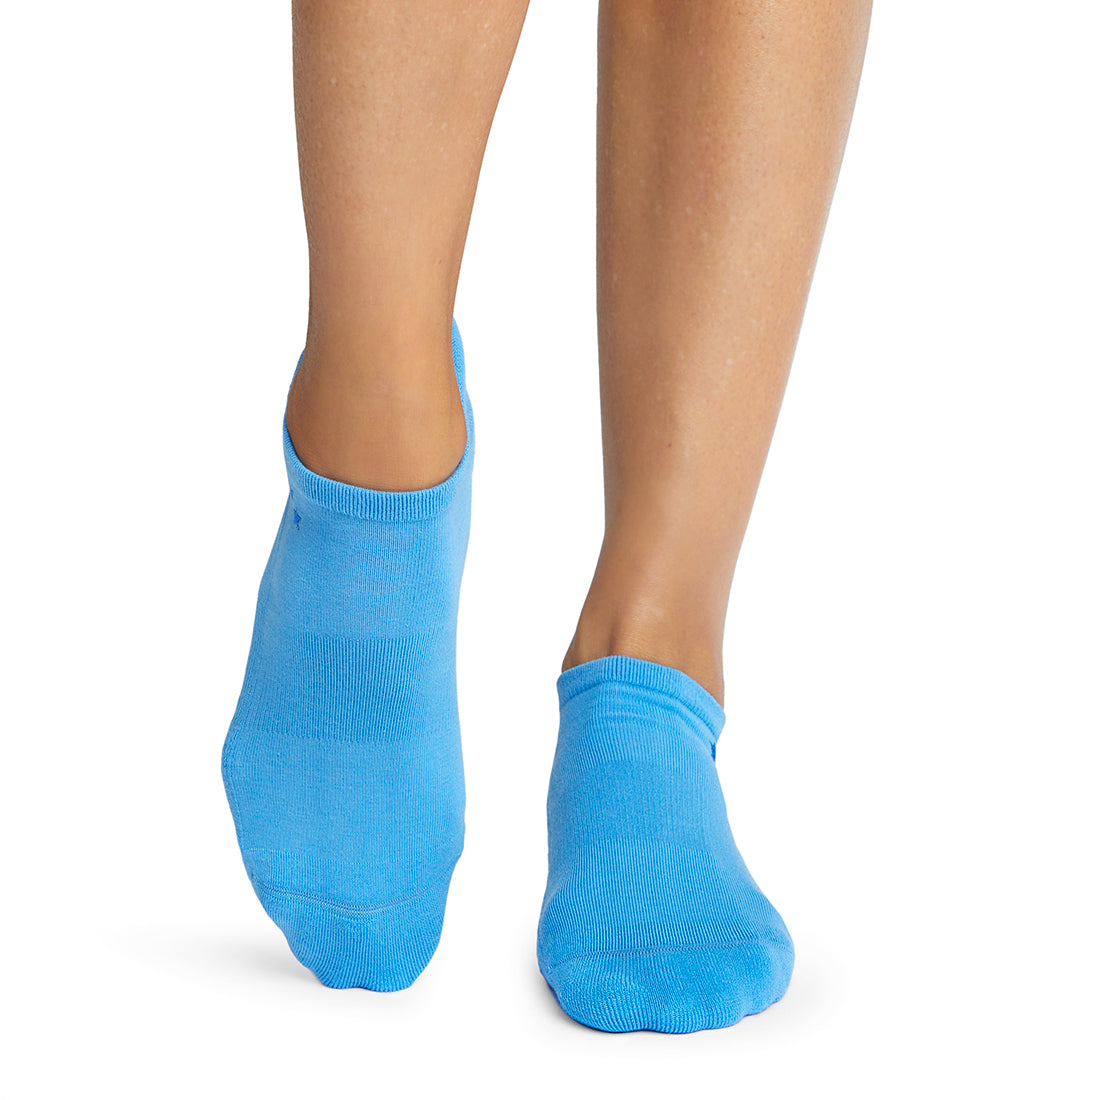 The Barre Code x Tavi Noir Low Rise YOU ARE GOLD BABY Grip Socks